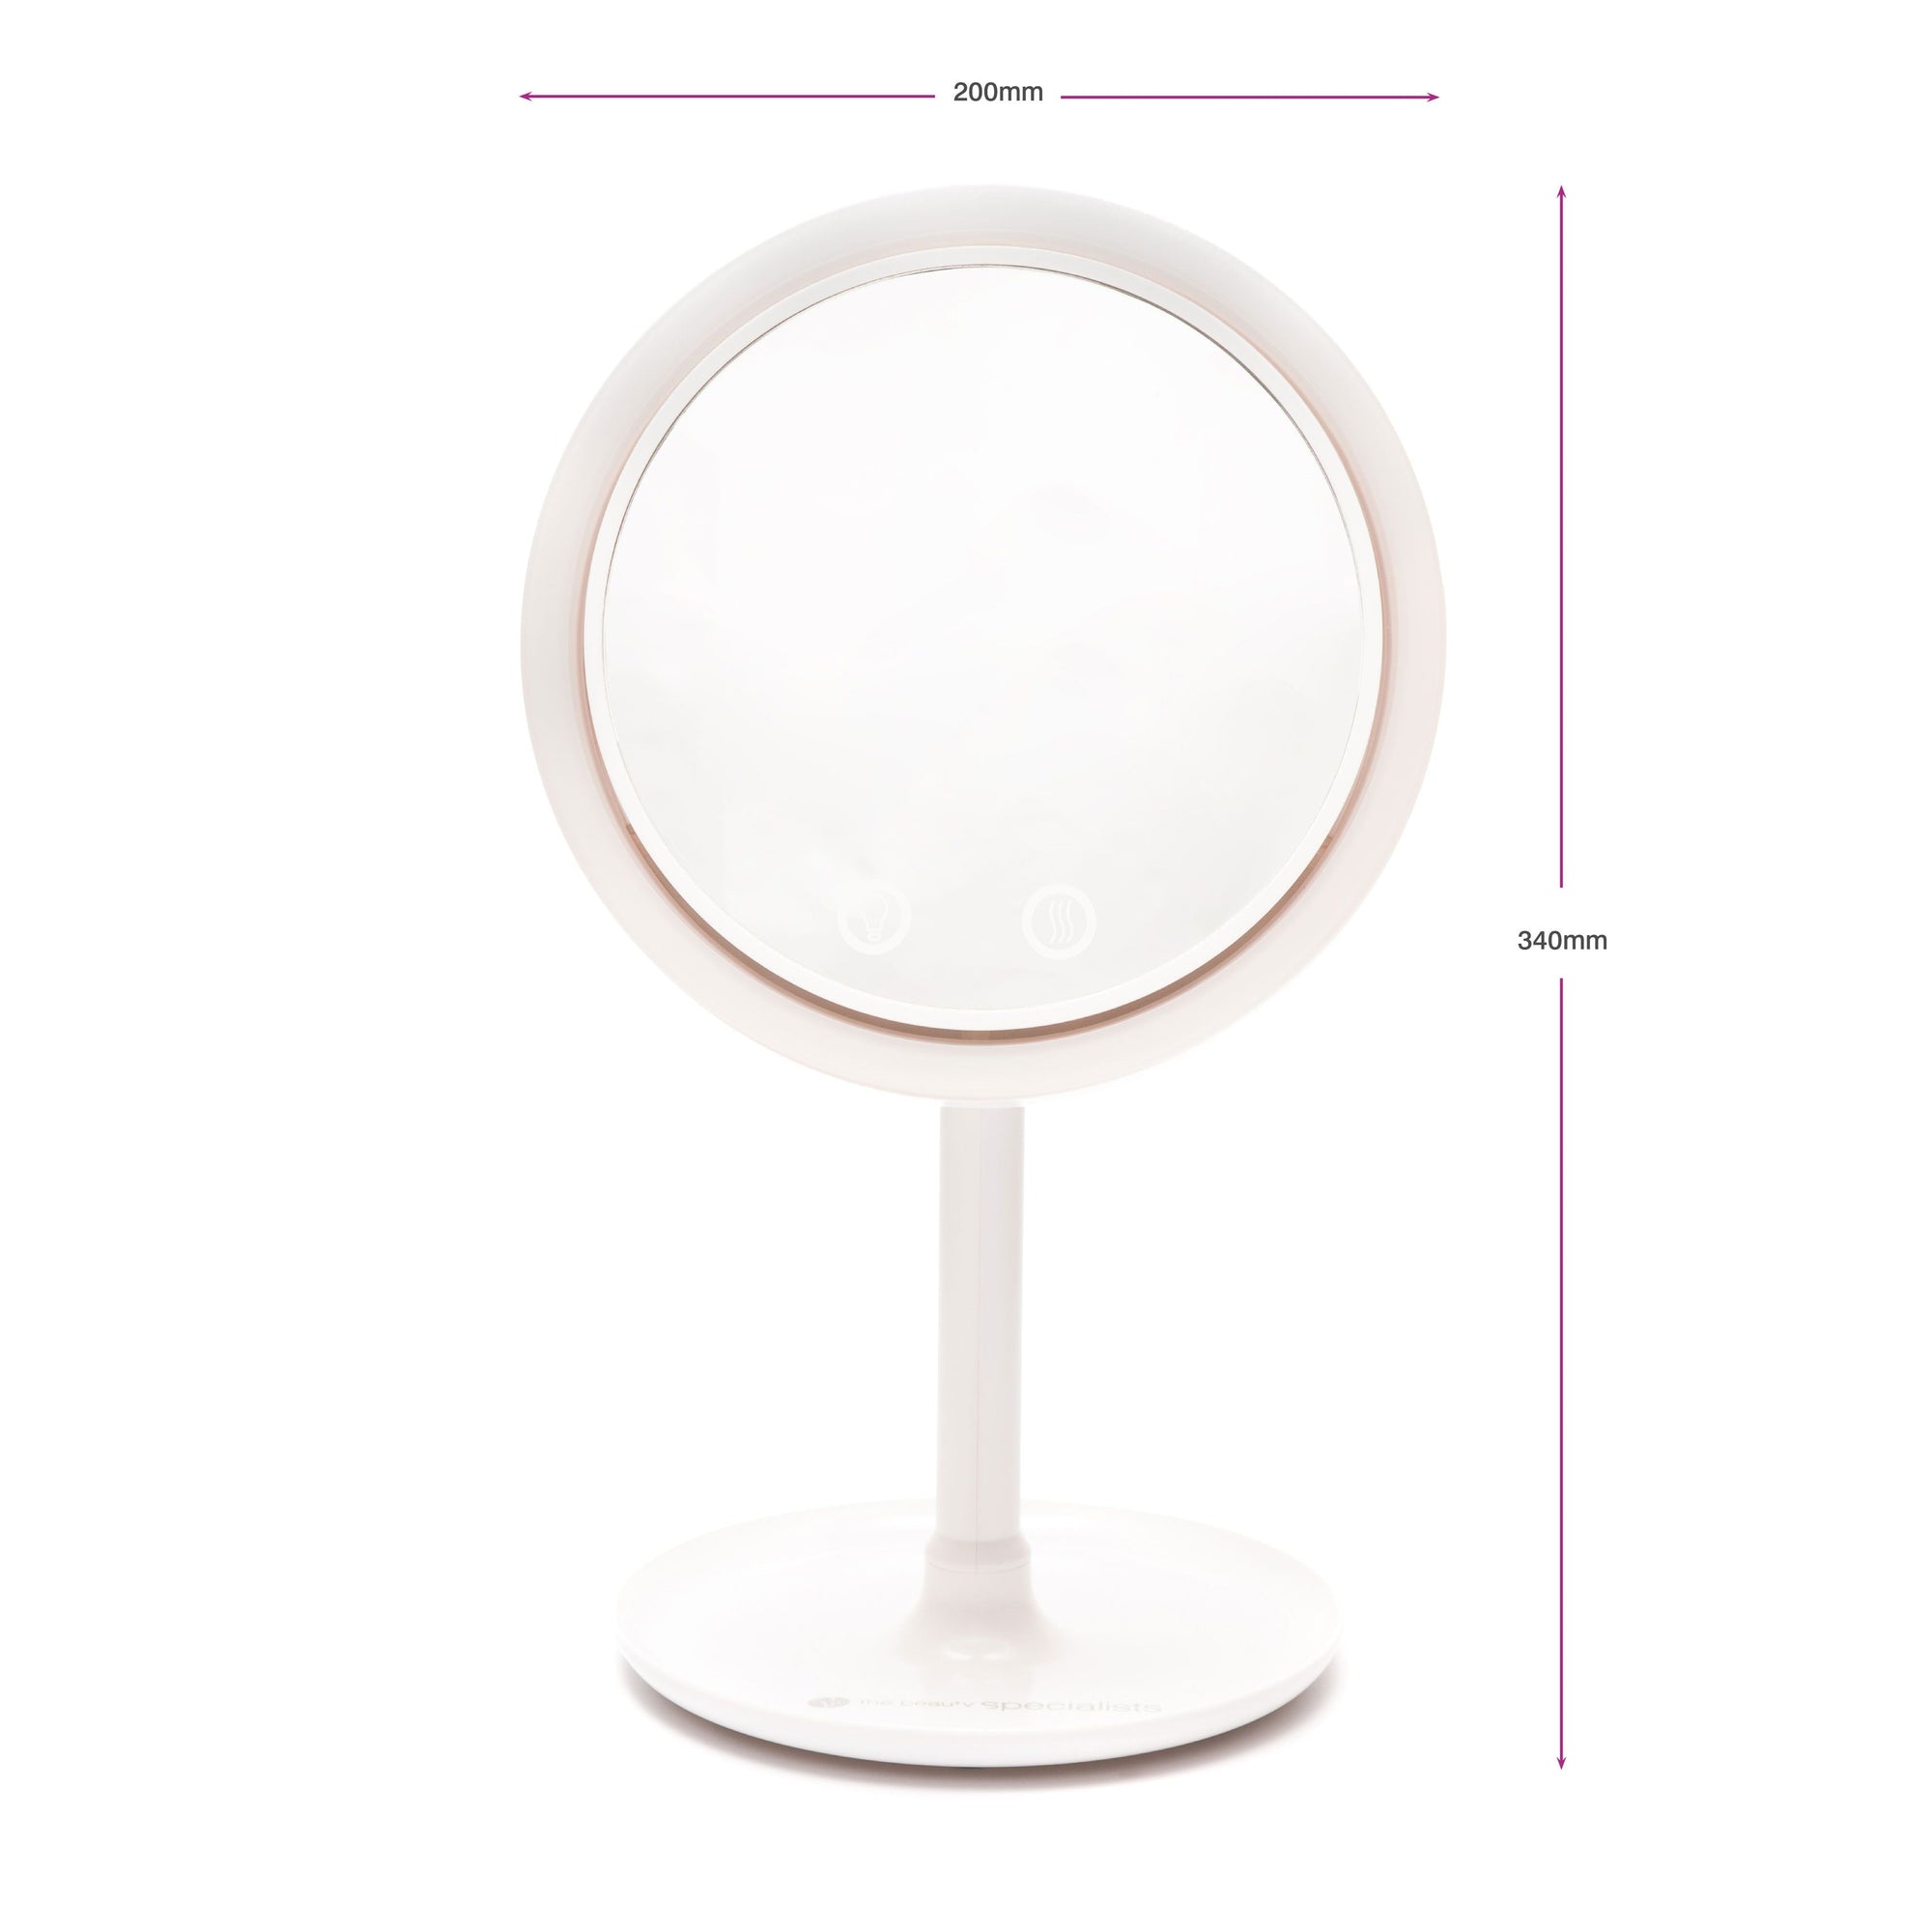 keep cool mirror with fan and LED light ring with arrows labelling height 340mm and width 200mm